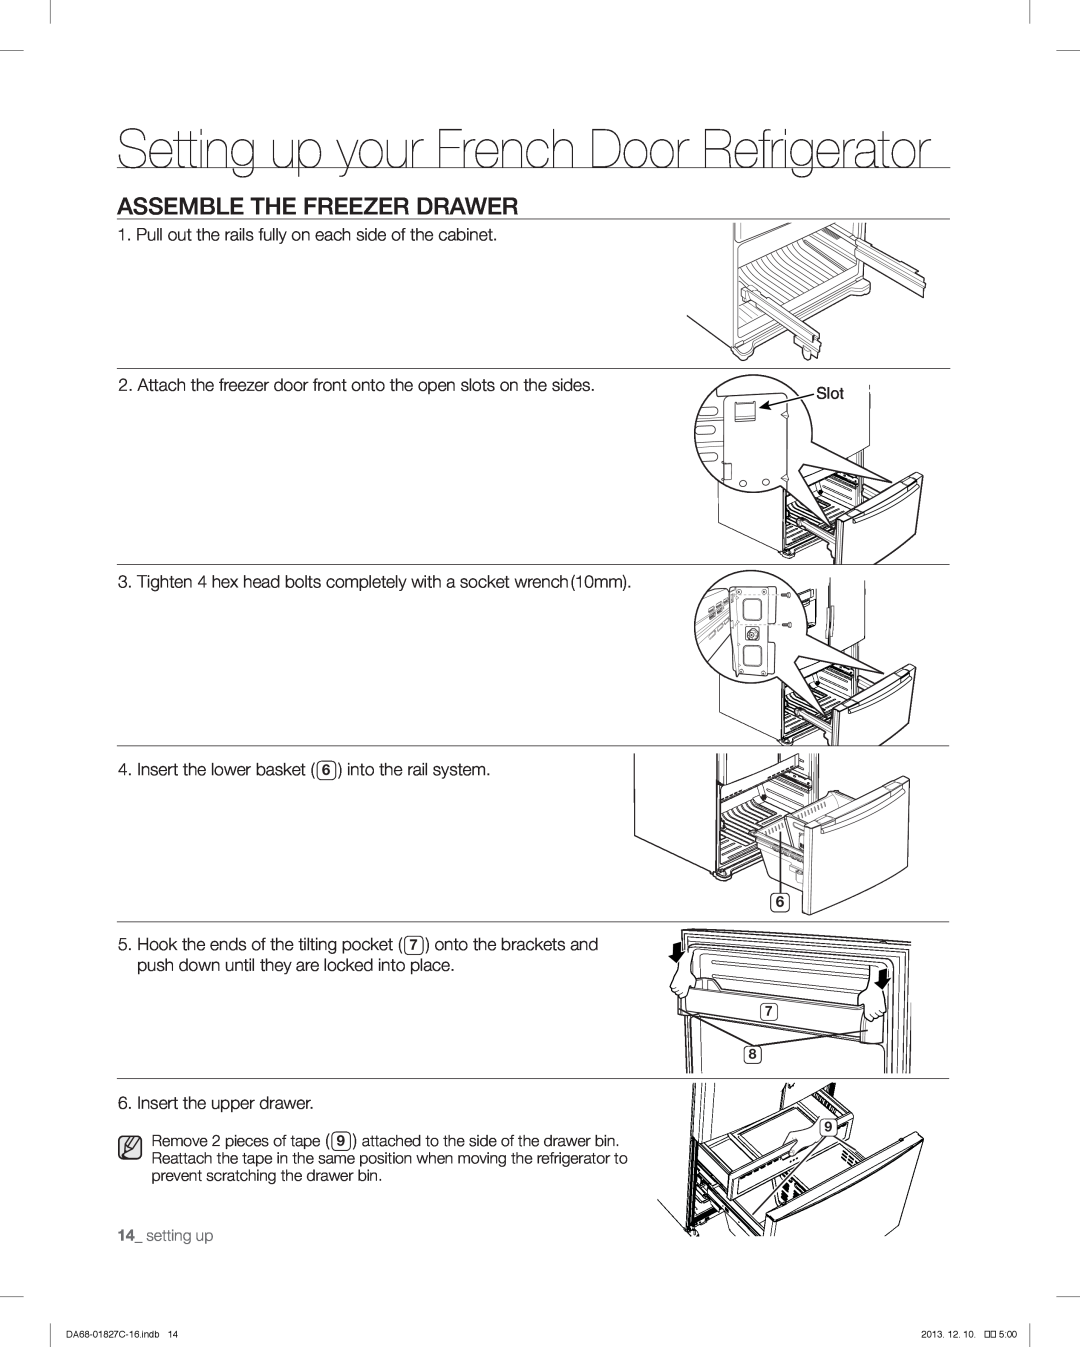 Samsung RFG237AARS user manual Assemble The Freezer Drawer, Setting up your French Door Refrigerator 